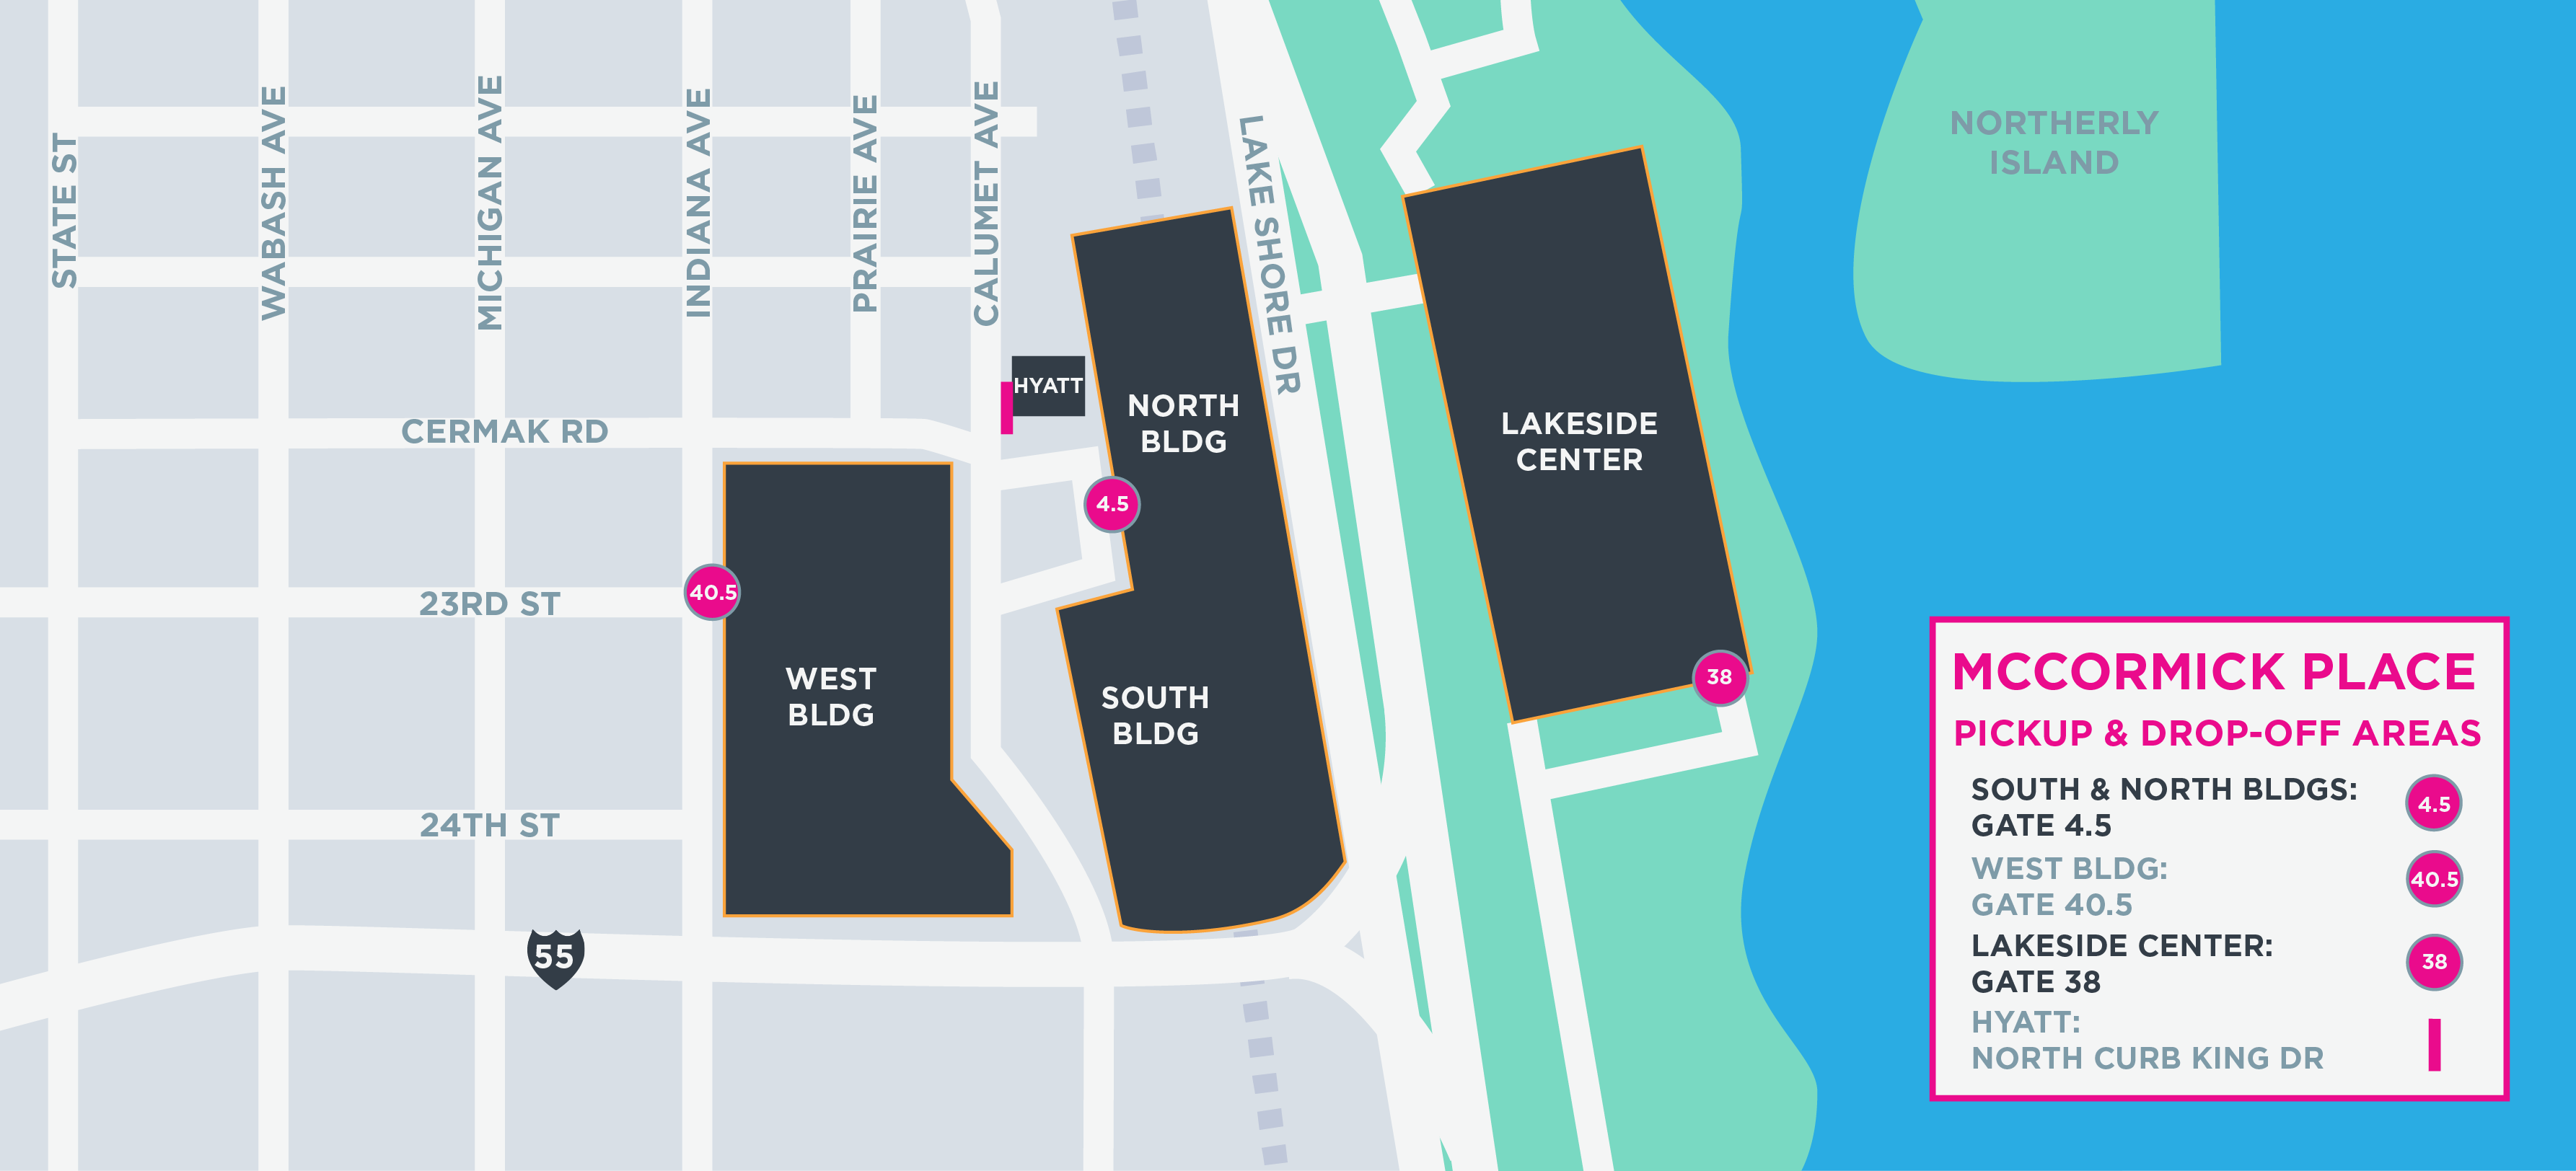 This image shows a map of McCormick place, including  pickup and drop-off areas.